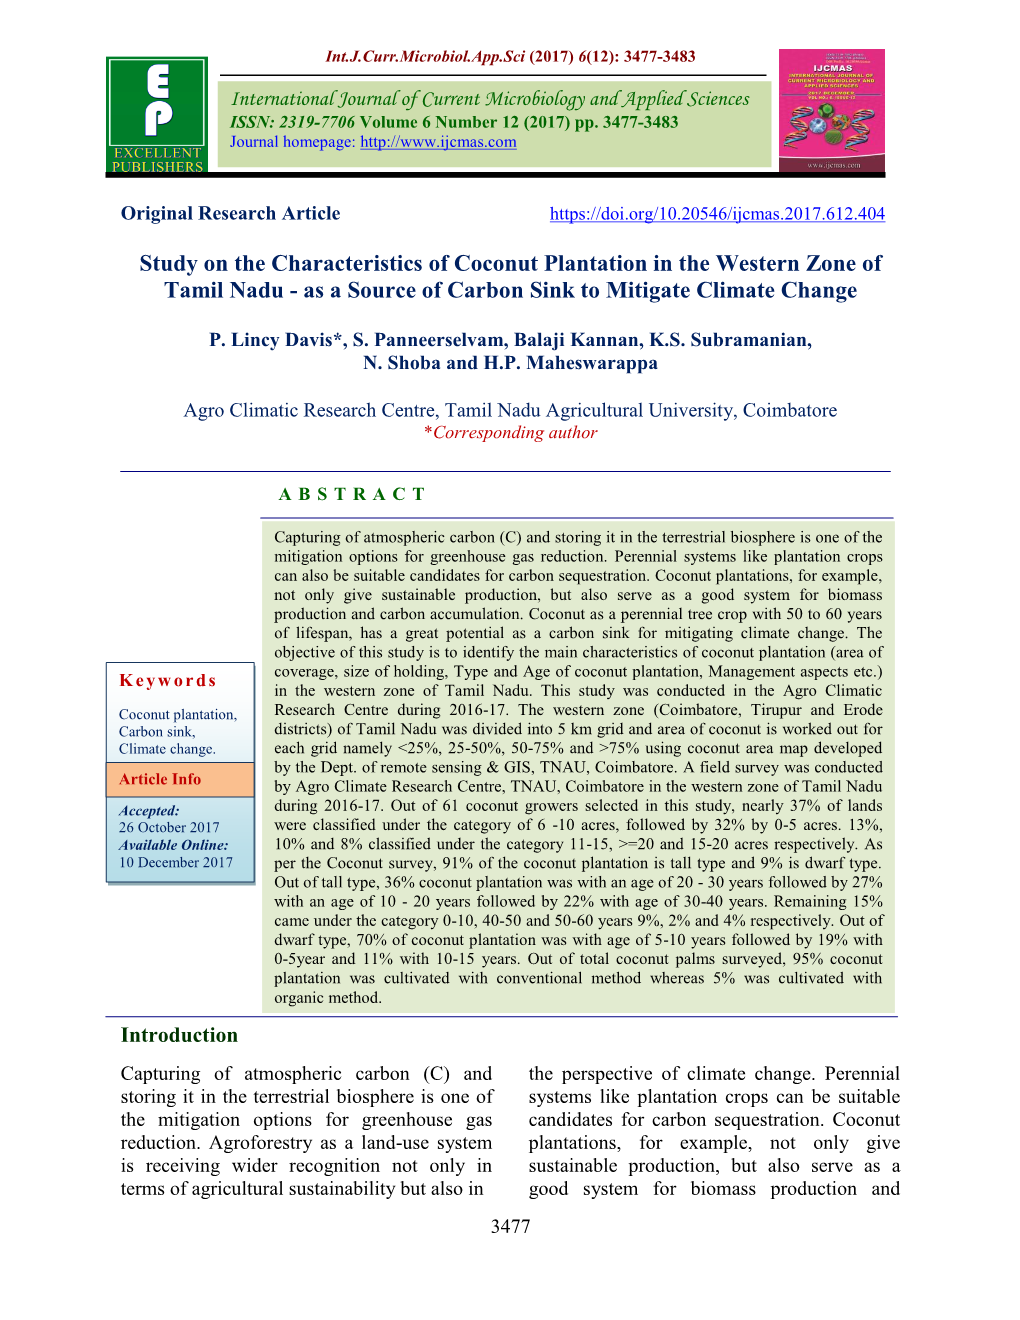 Study on the Characteristics of Coconut Plantation in the Western Zone of Tamil Nadu - As a Source of Carbon Sink to Mitigate Climate Change